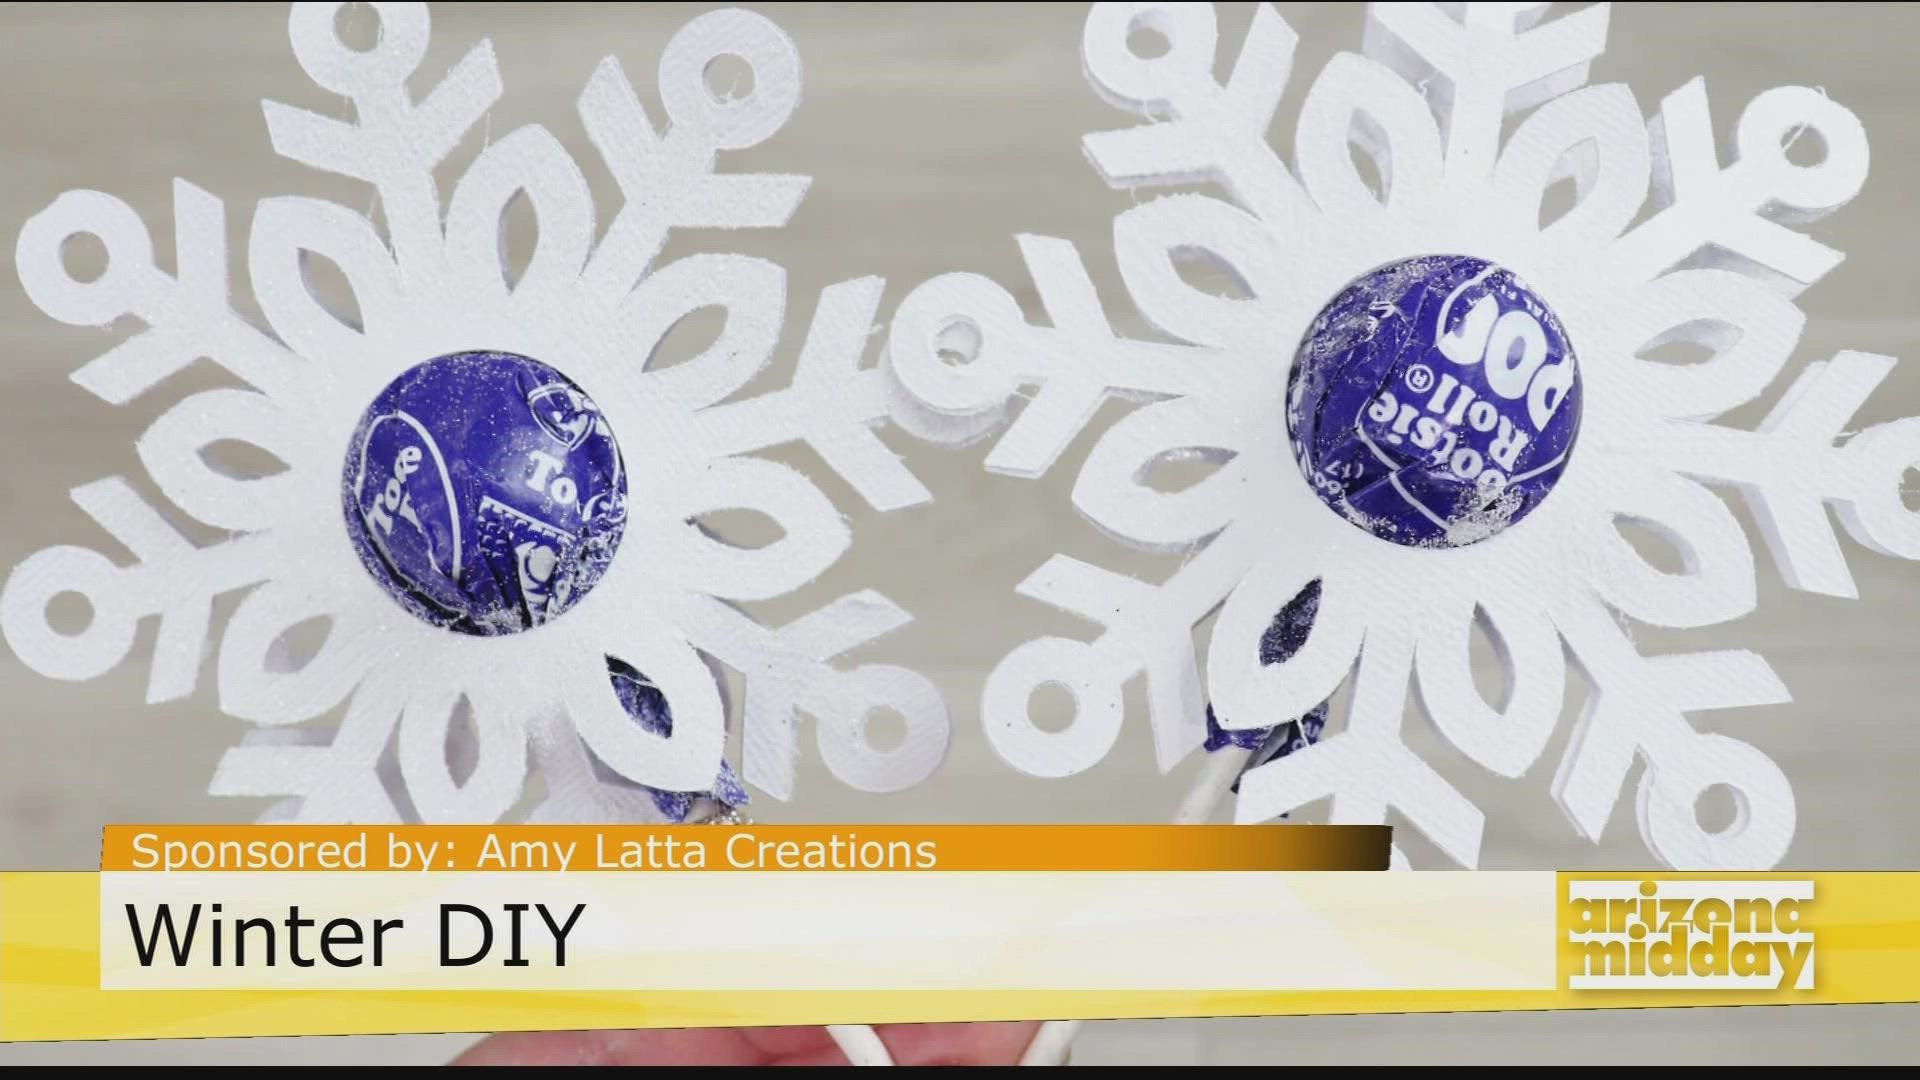 DIY Expert, Amy Latta, shows us how to have some winter fun with crafting this season!